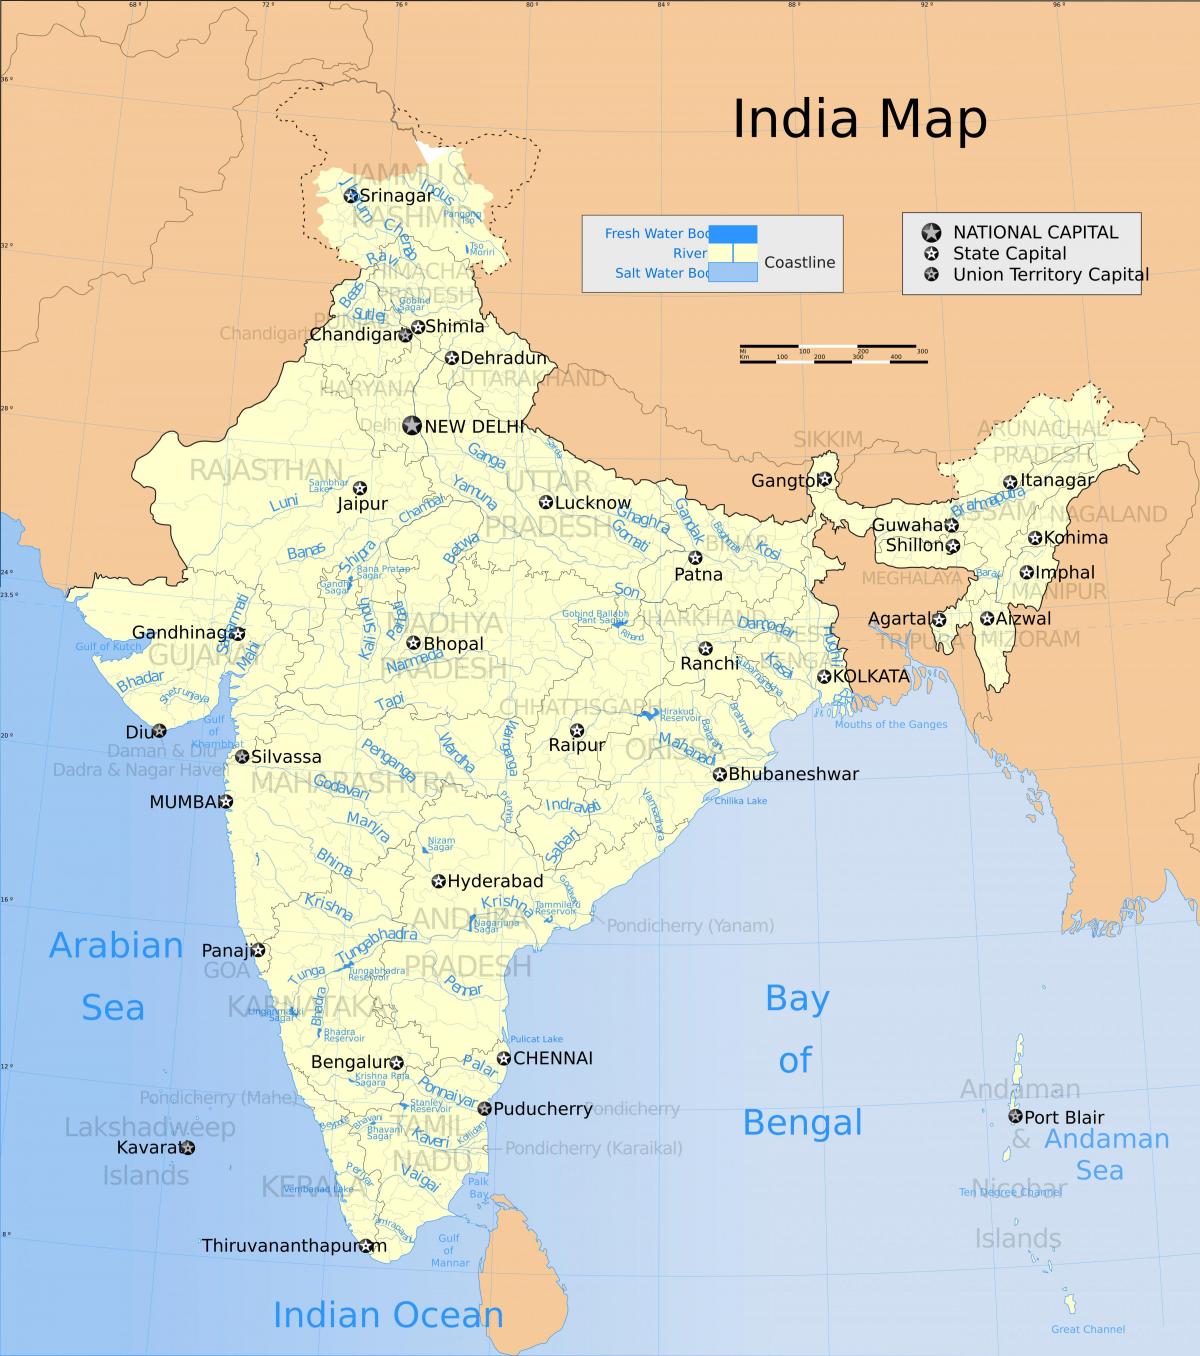 Rivers in India map